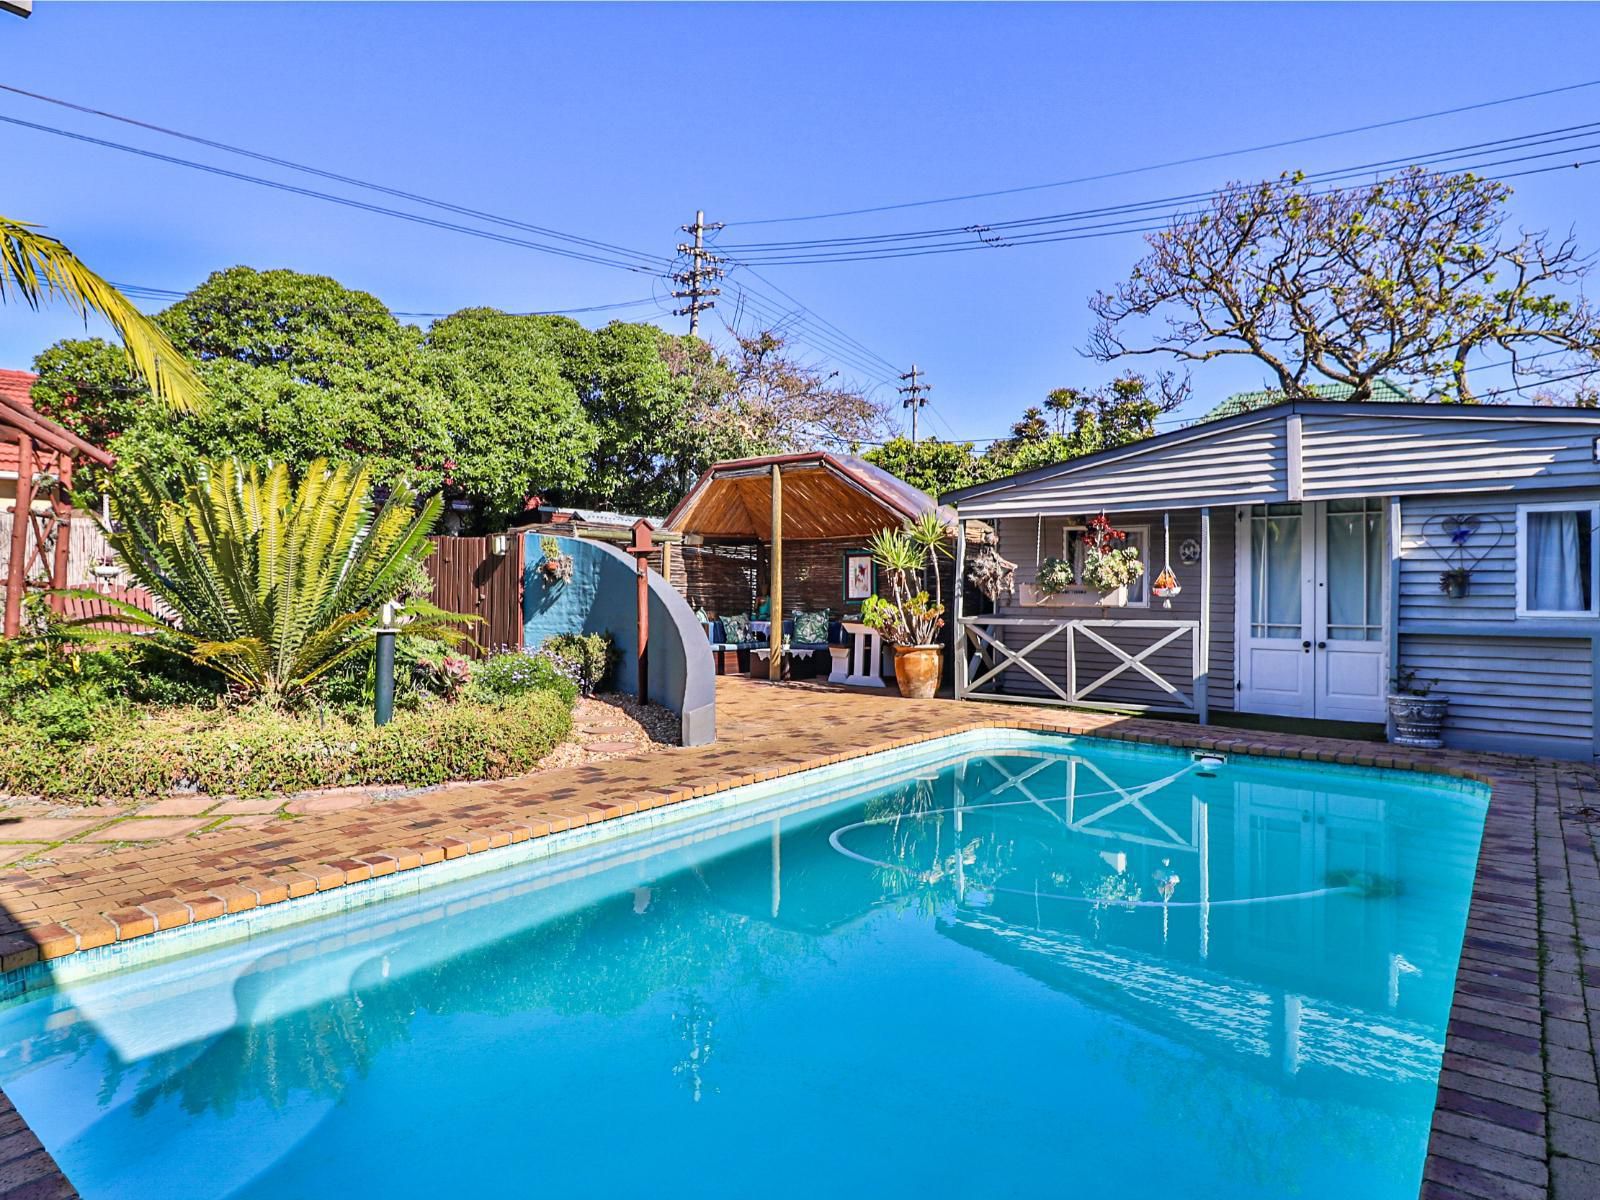 Inn Style Guest House Pinelands Cape Town Western Cape South Africa Complementary Colors, House, Building, Architecture, Palm Tree, Plant, Nature, Wood, Garden, Swimming Pool